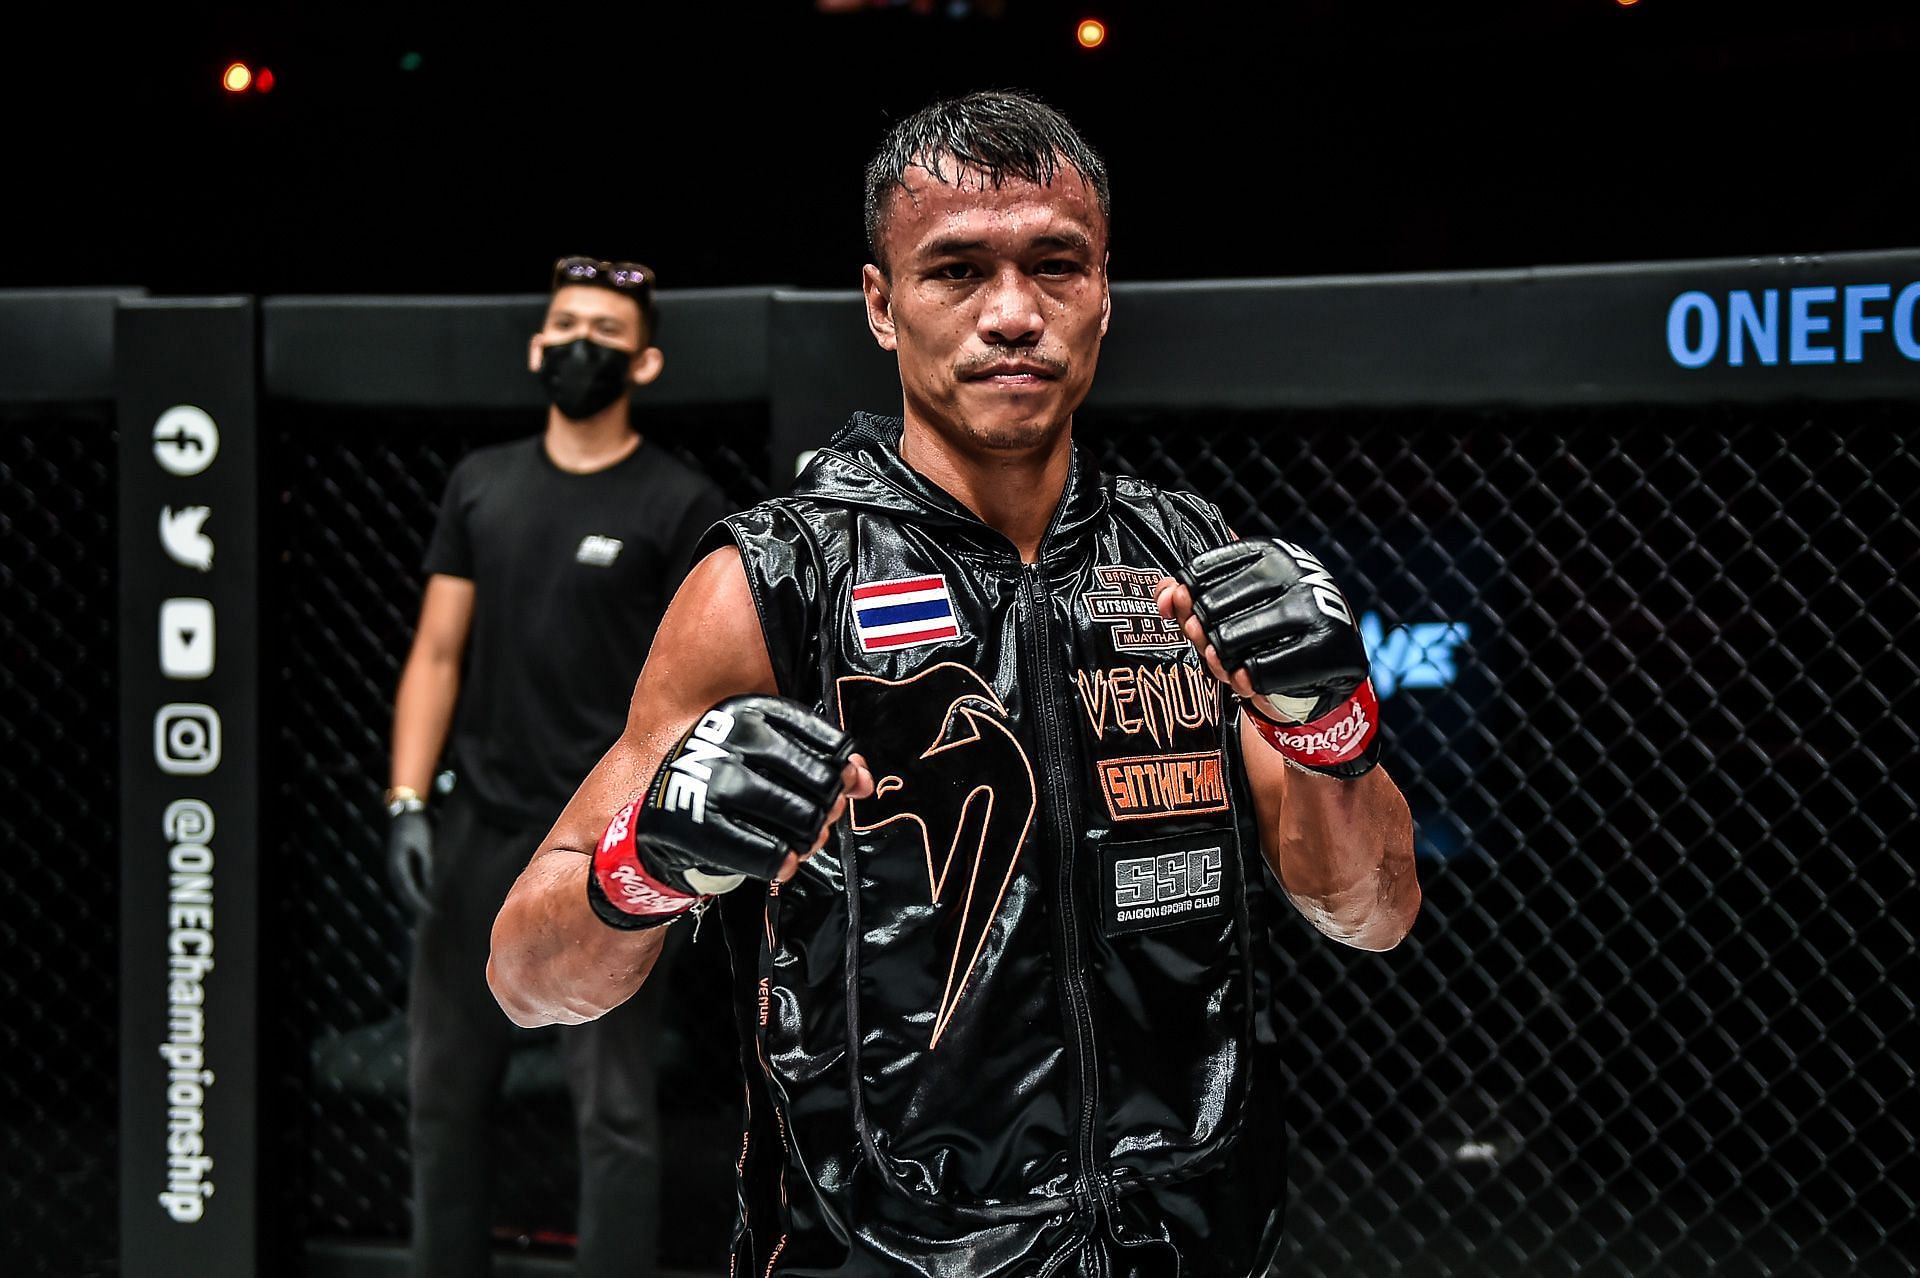 Sitthichai Sitsongpeenong says he owes everything to the sport of Muay Thai. | [Photo: ONE Championship]